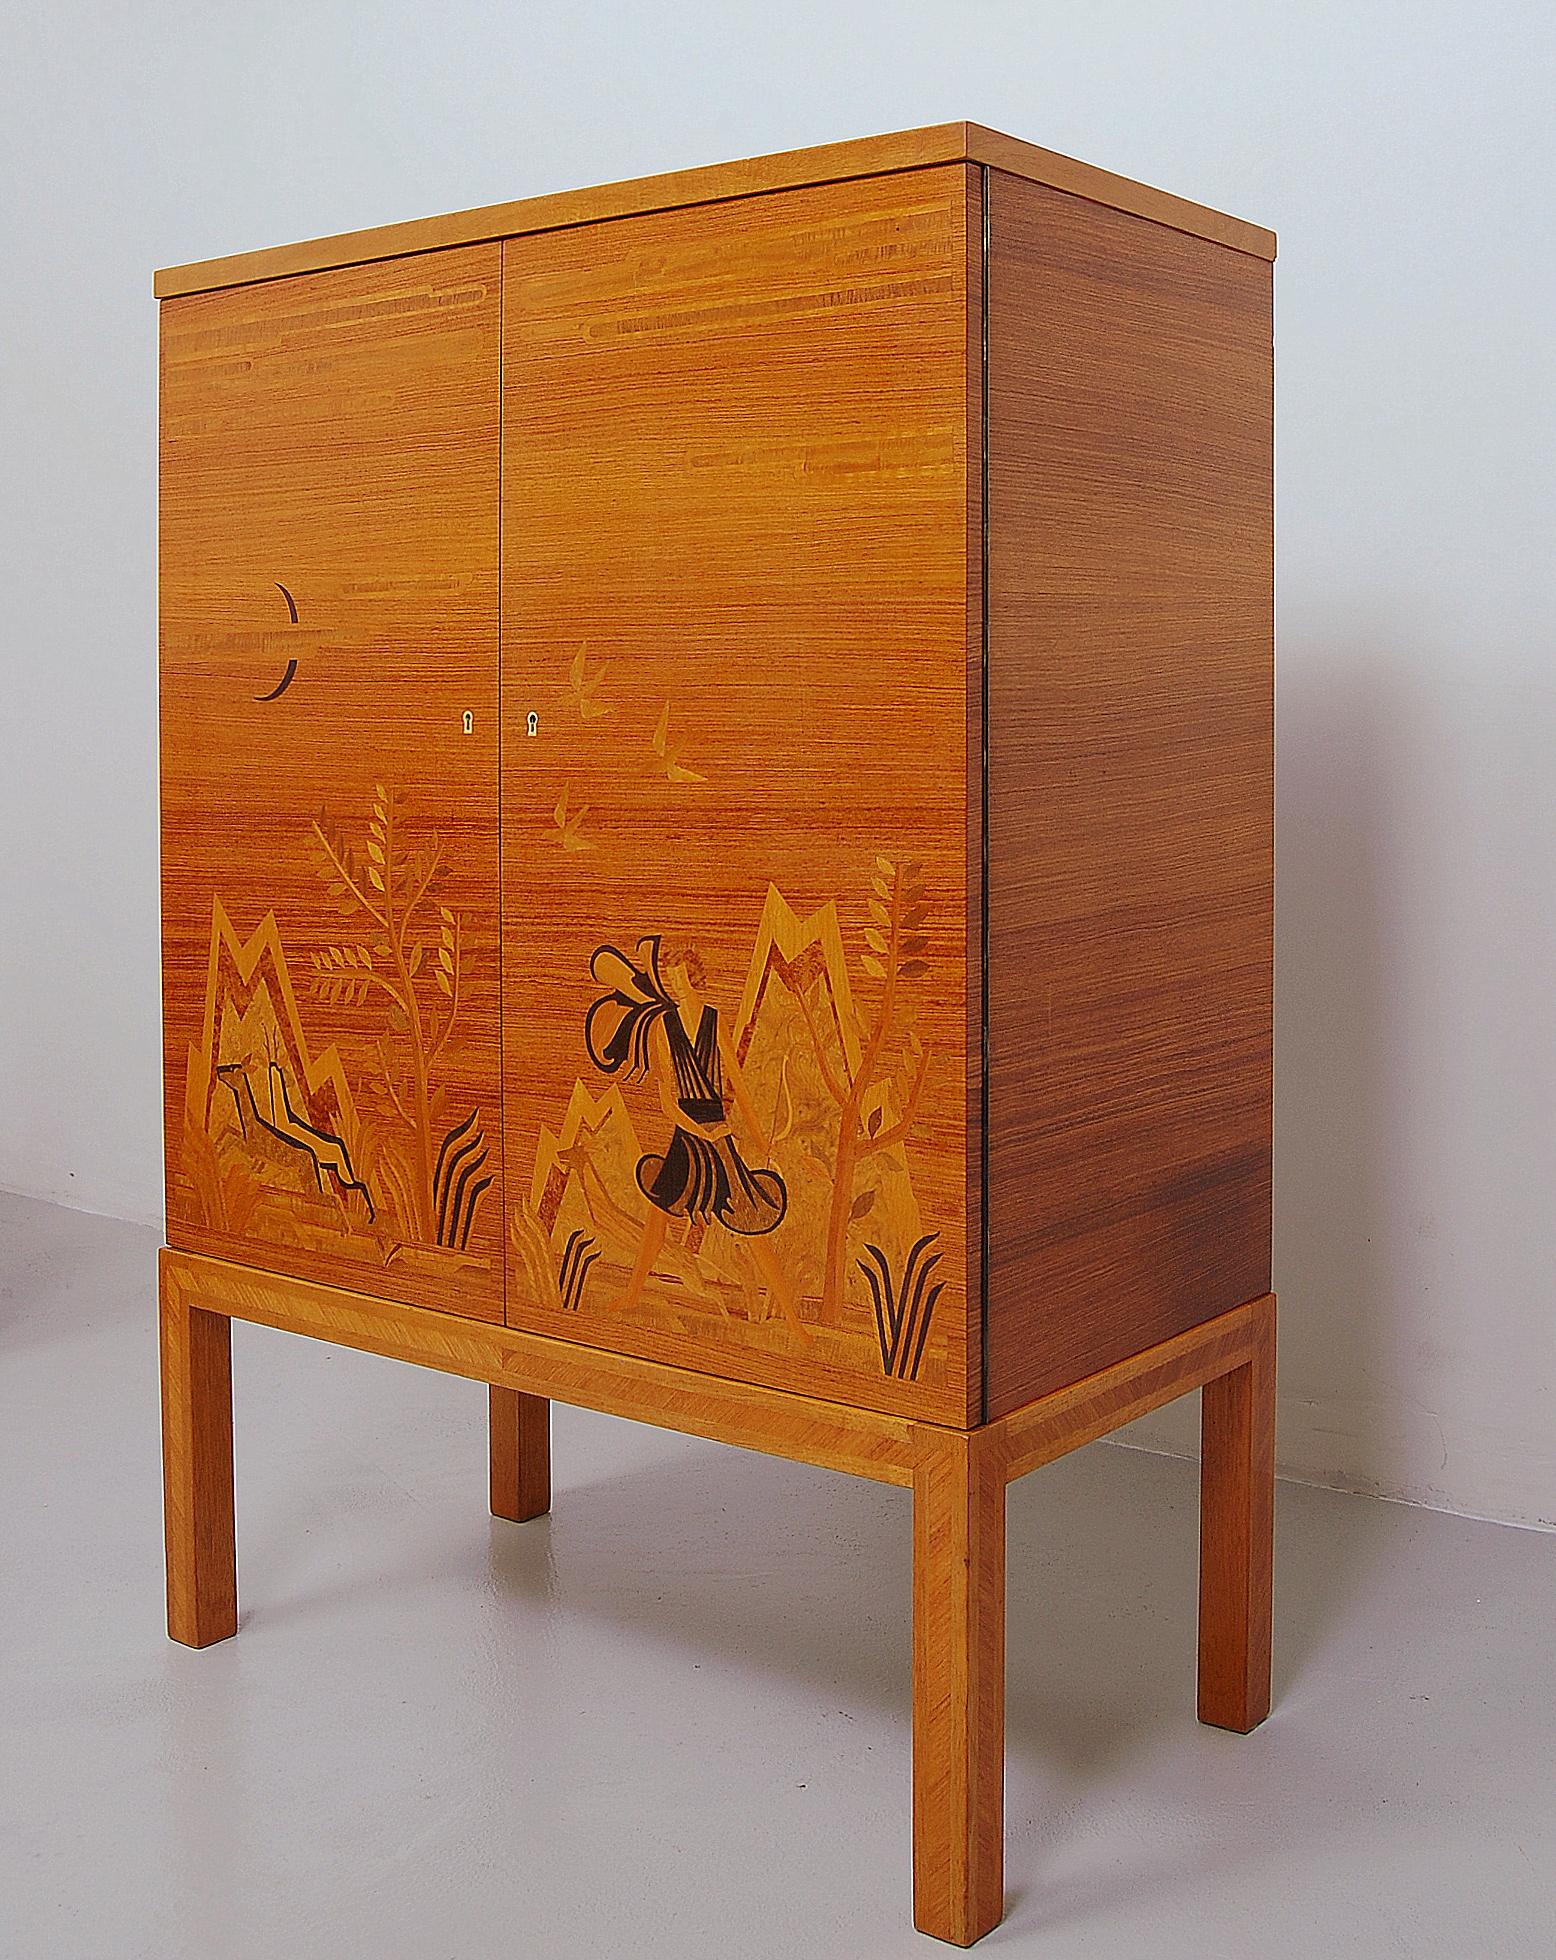 Elegant dry bar cabinet with beautiful intarsia veneer showing Diana, the goddess of the hunt, moon, wild animals and fertility. Produced by Reiners Möbelfabrik in Mjölby. Marked in back with manufacturing date, 27 July 1939. Very good condition.